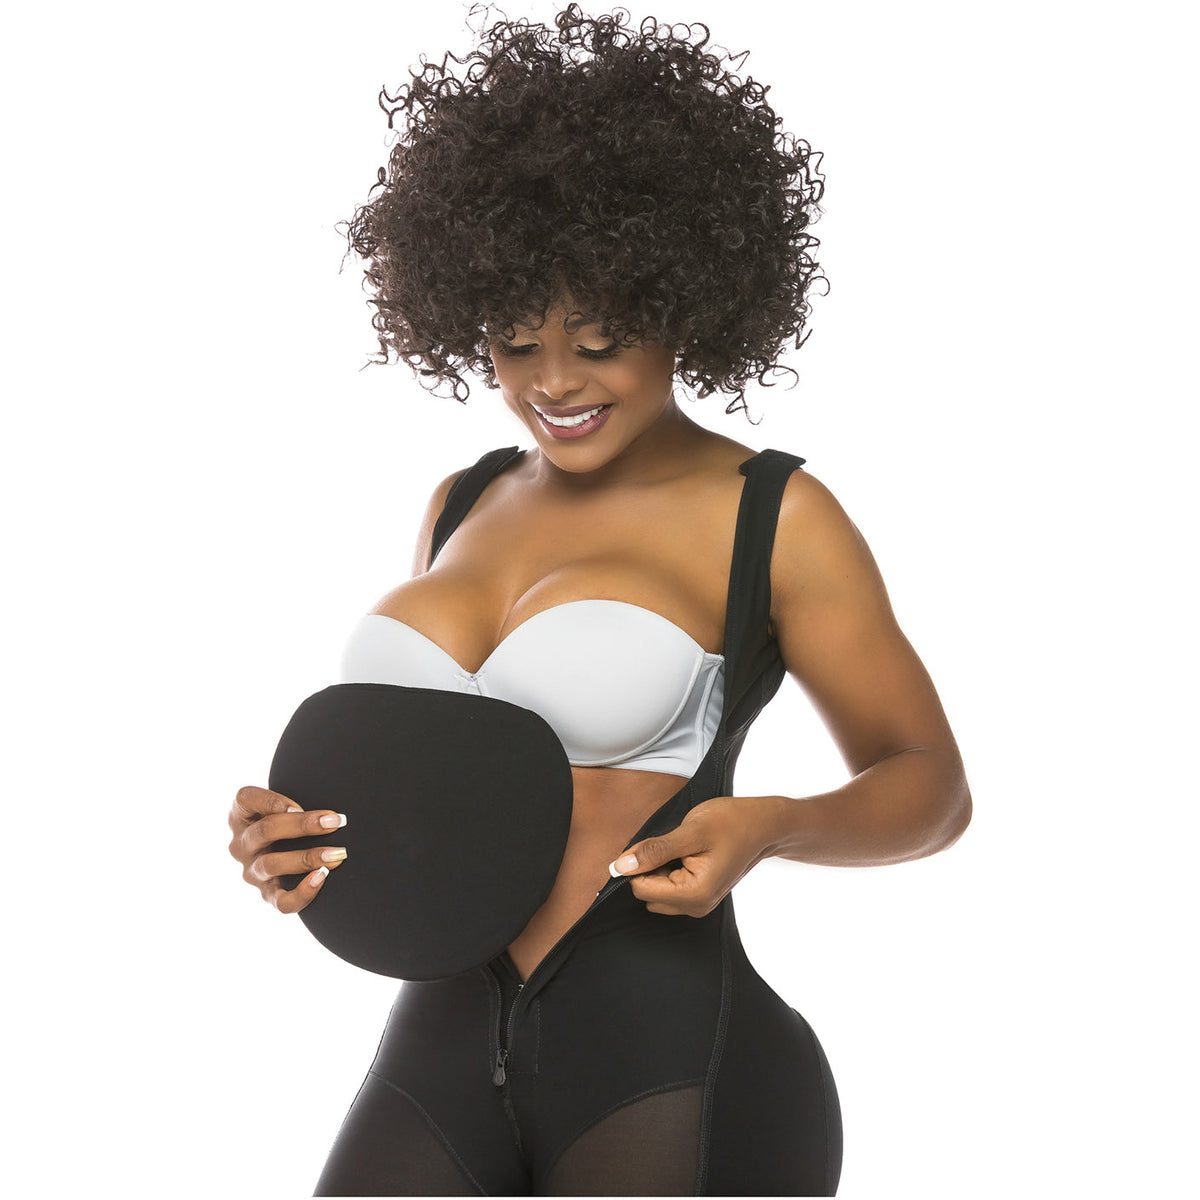 Fajas Salome 0328, Surgical Breast Augmentation Bra with Sleeves, Liposuction Arm Shaper Postsurgical Girdle for Women